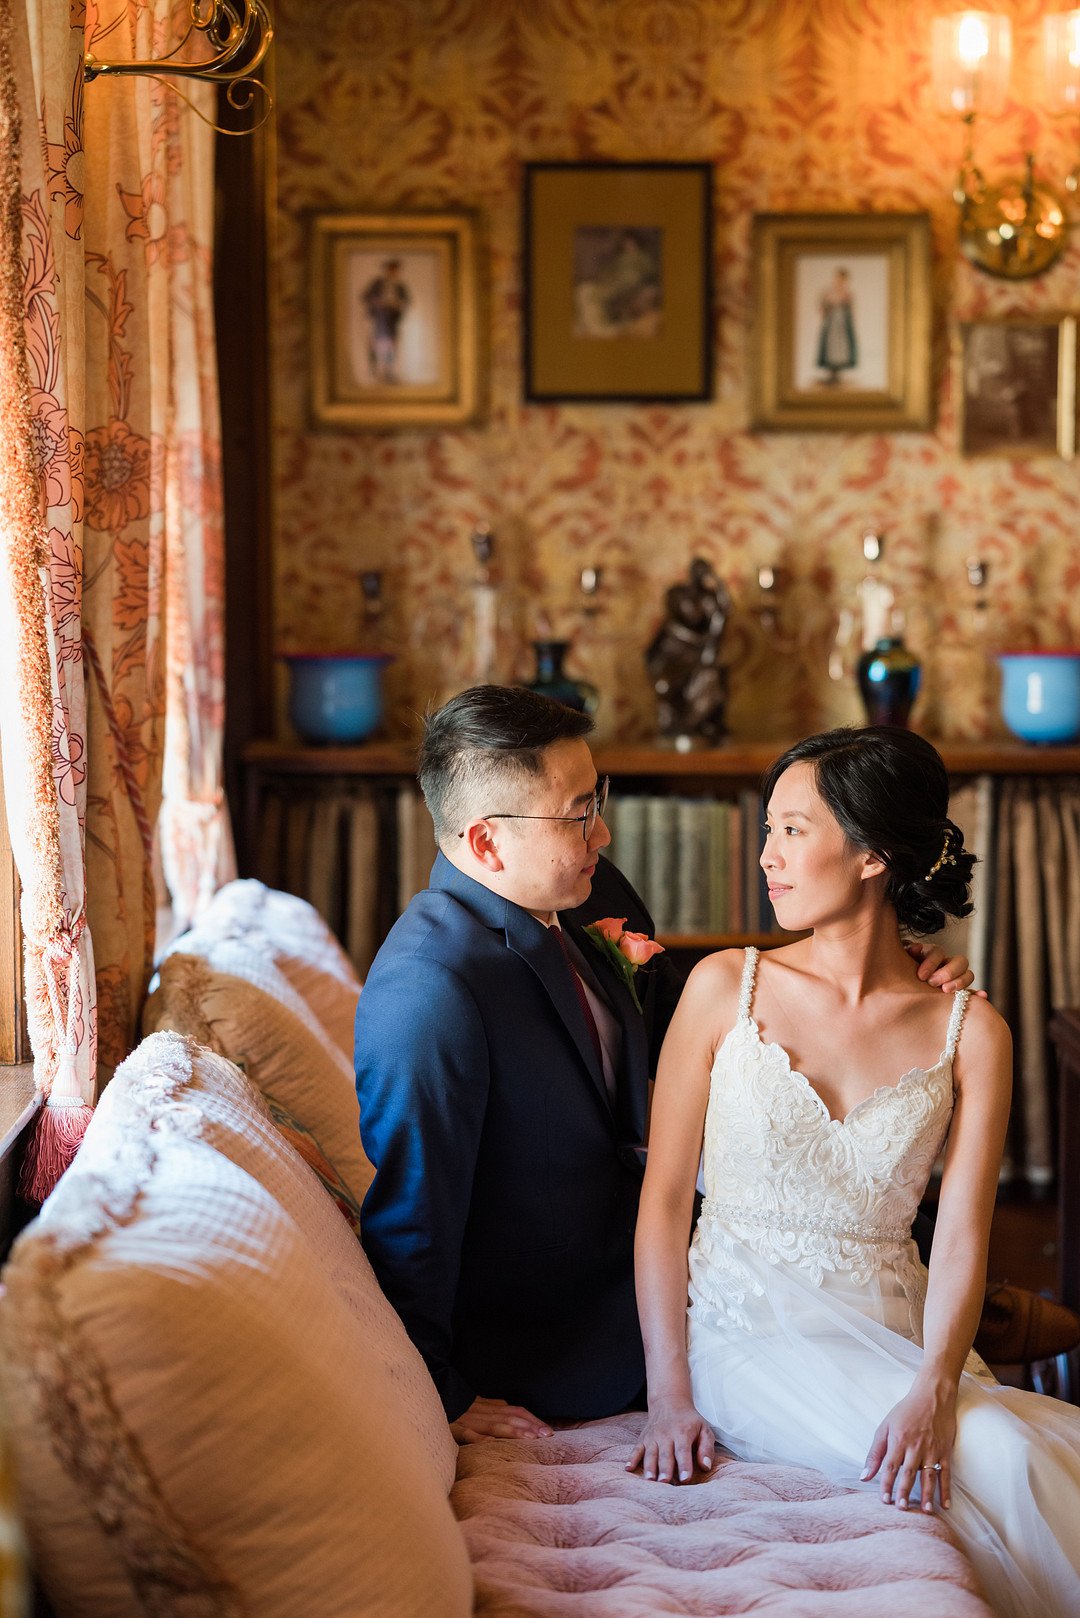 Chan_Chan_Winterlyn Photography_GLESSNER HOUSE CHICAGO WEDDING-43_low.jpg